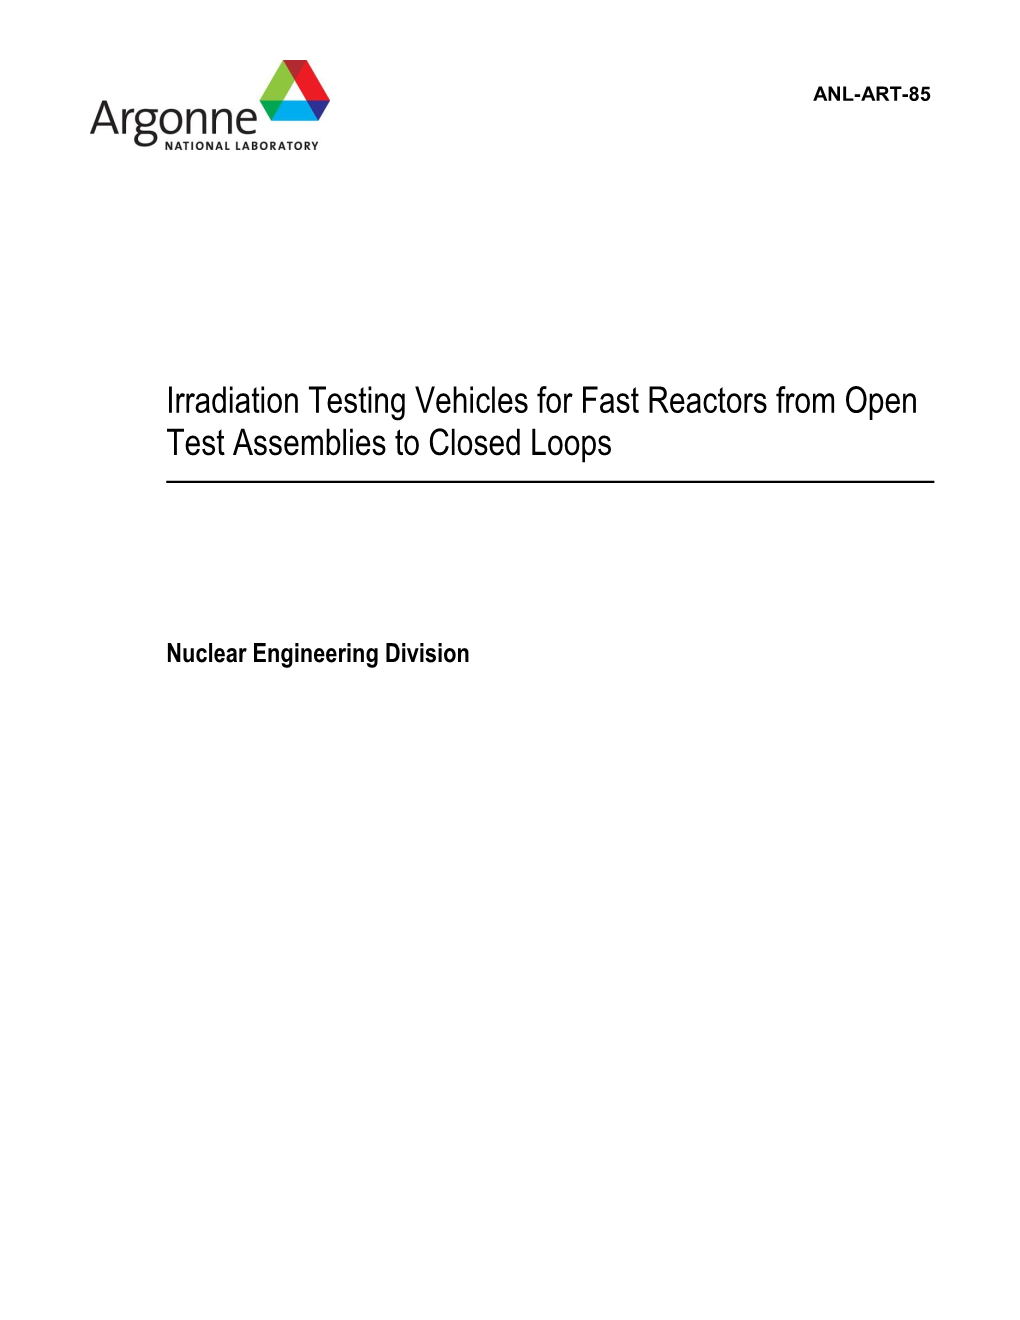 Irradiation Testing Vehicles for Fast Reactors from Open Test Assemblies to Closed Loops